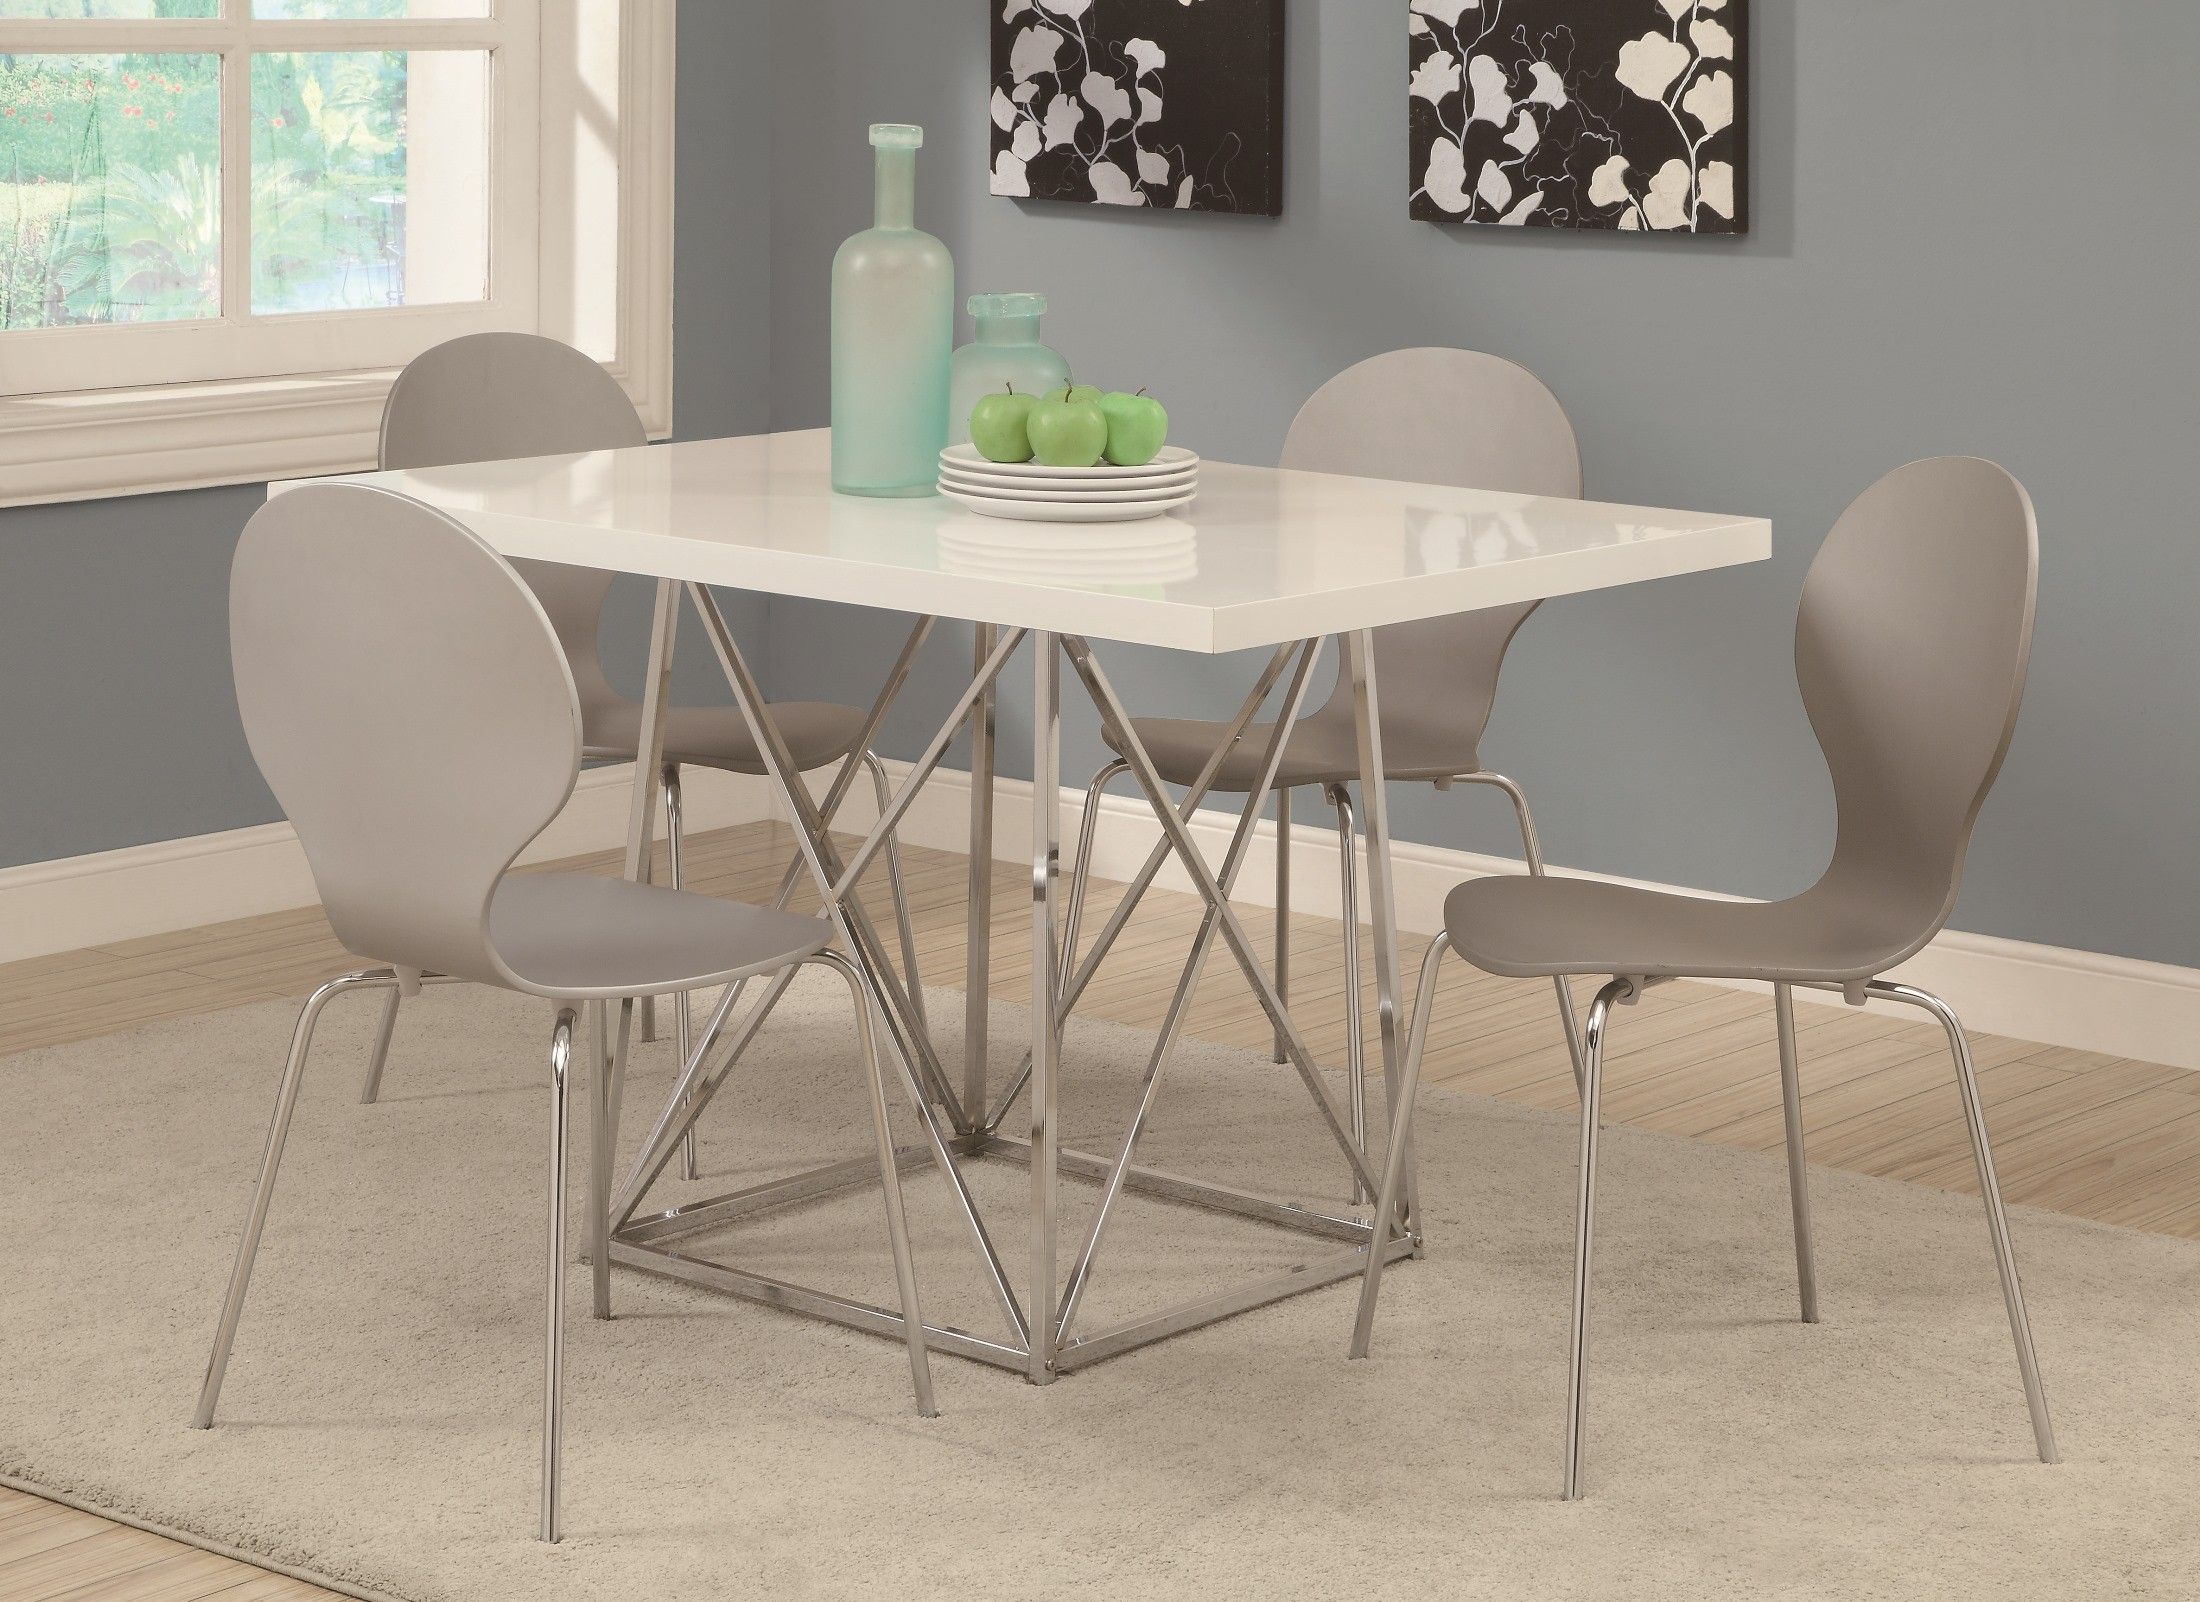 1046 White Glossy / Chrome Metal Dining Room Set From Intended For Latest Chrome Metal Dining Tables (View 1 of 15)